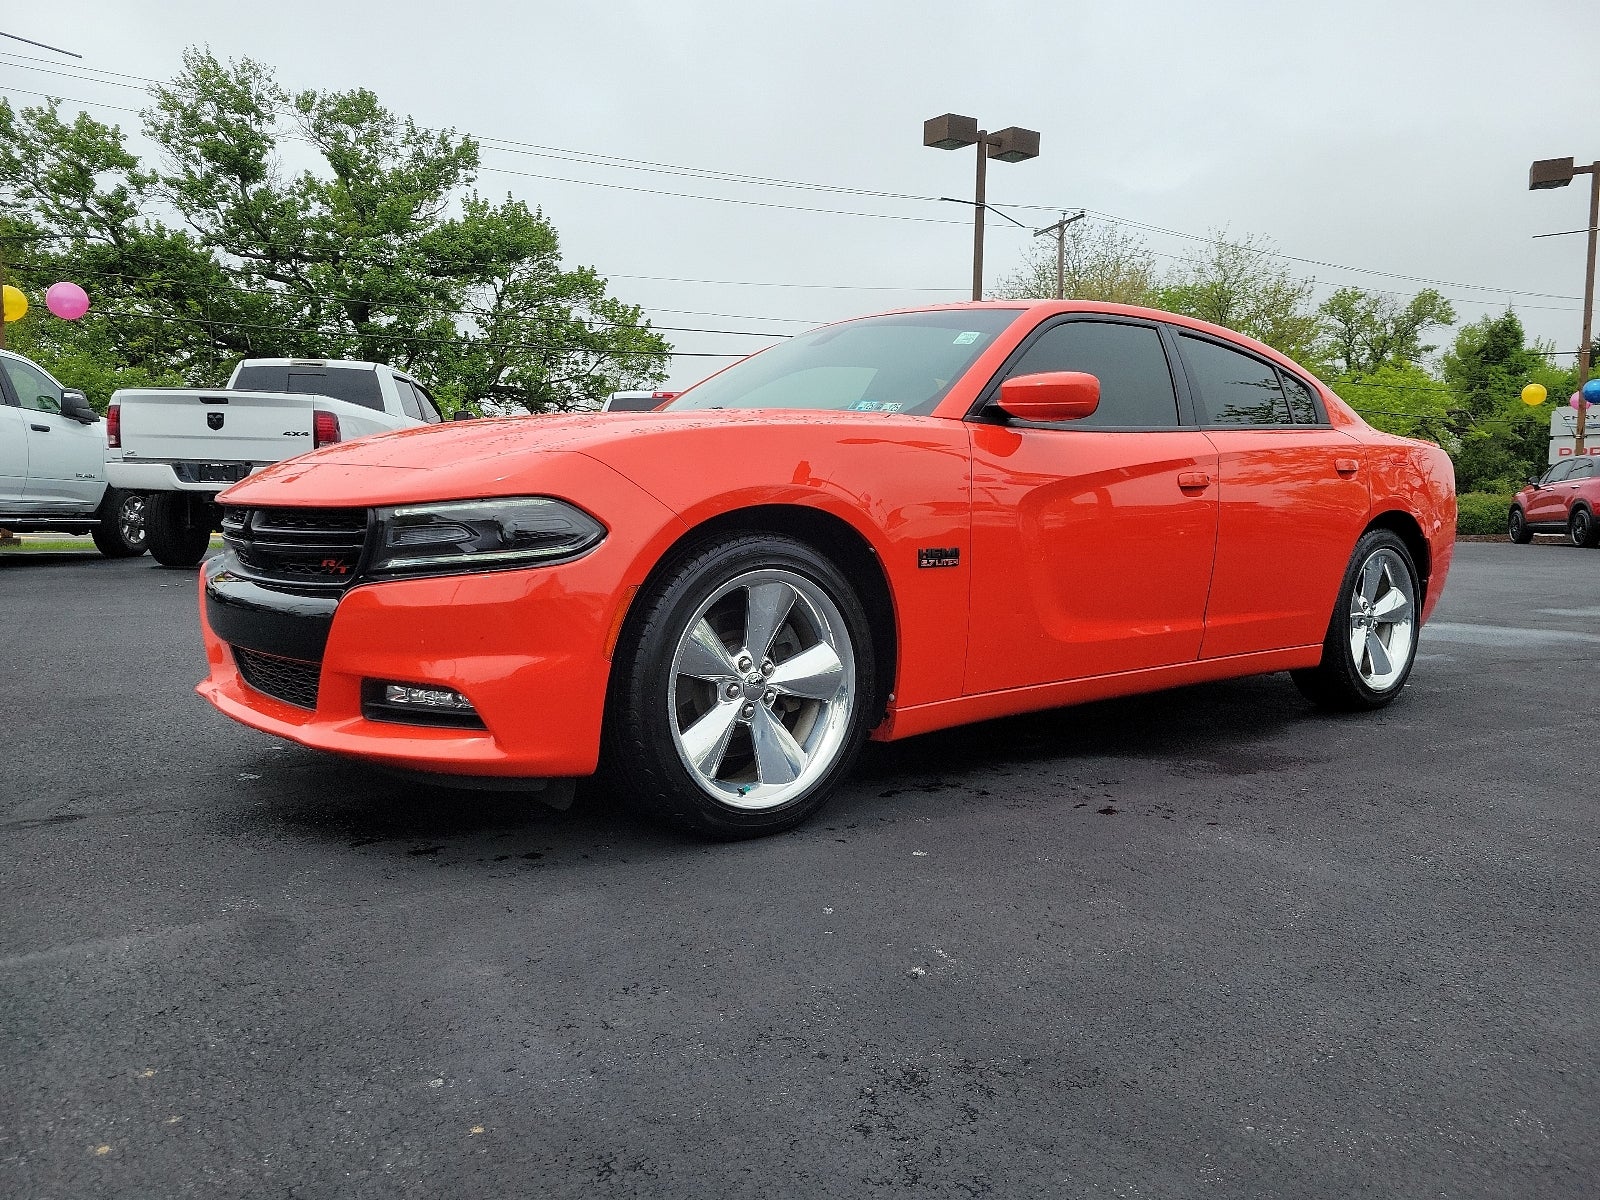 2016 Dodge Charger Road/Track